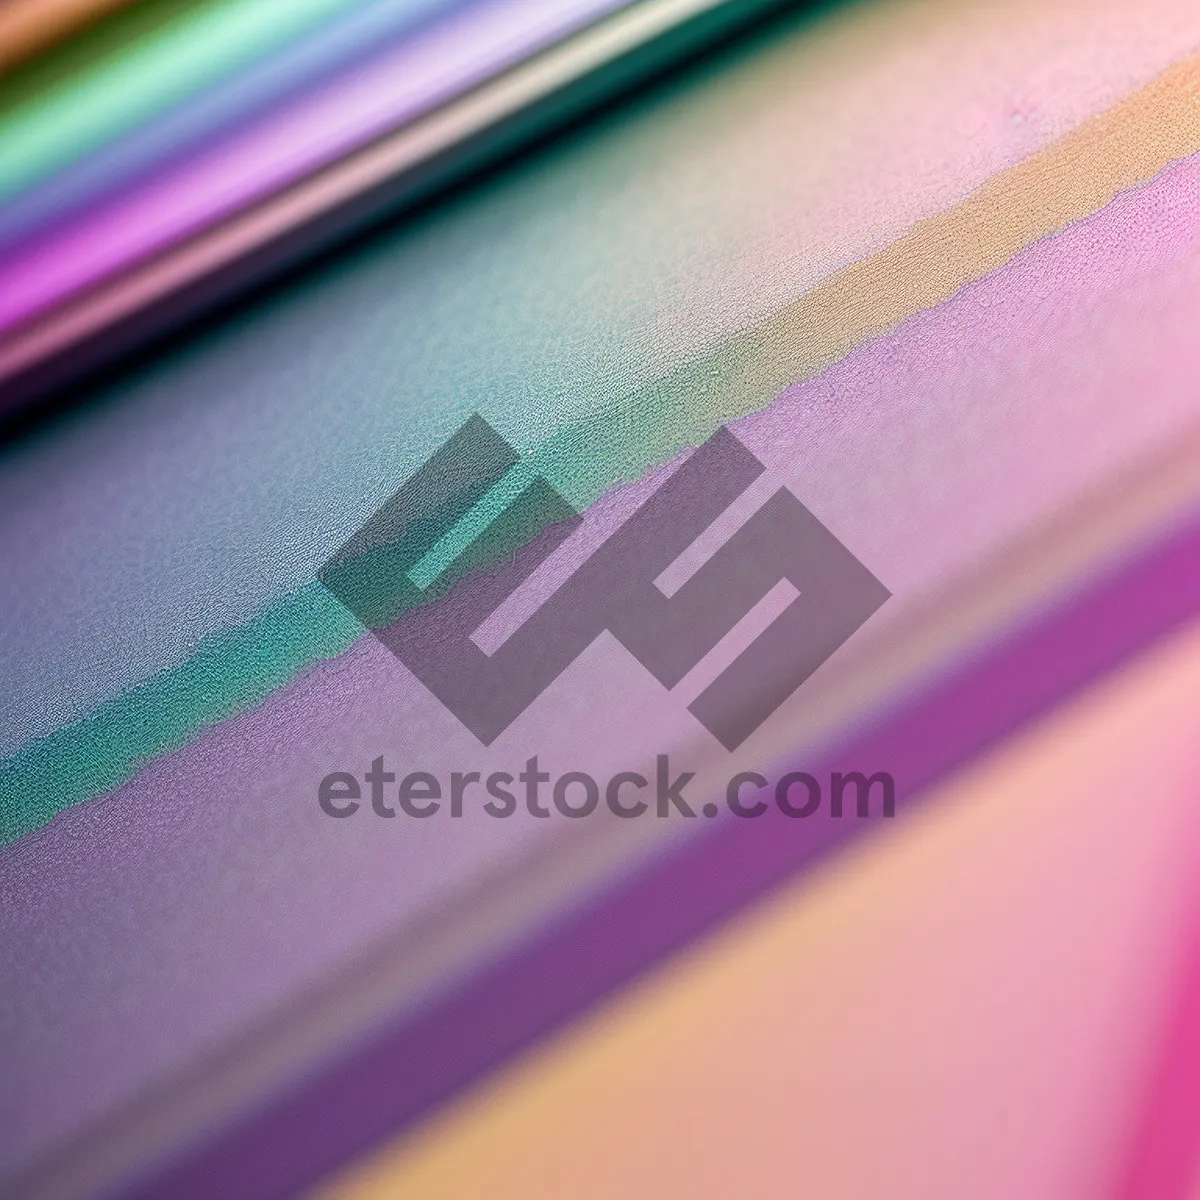 Picture of Colorful Pencil Design: Vibrant Abstract Art with Motion and Texture